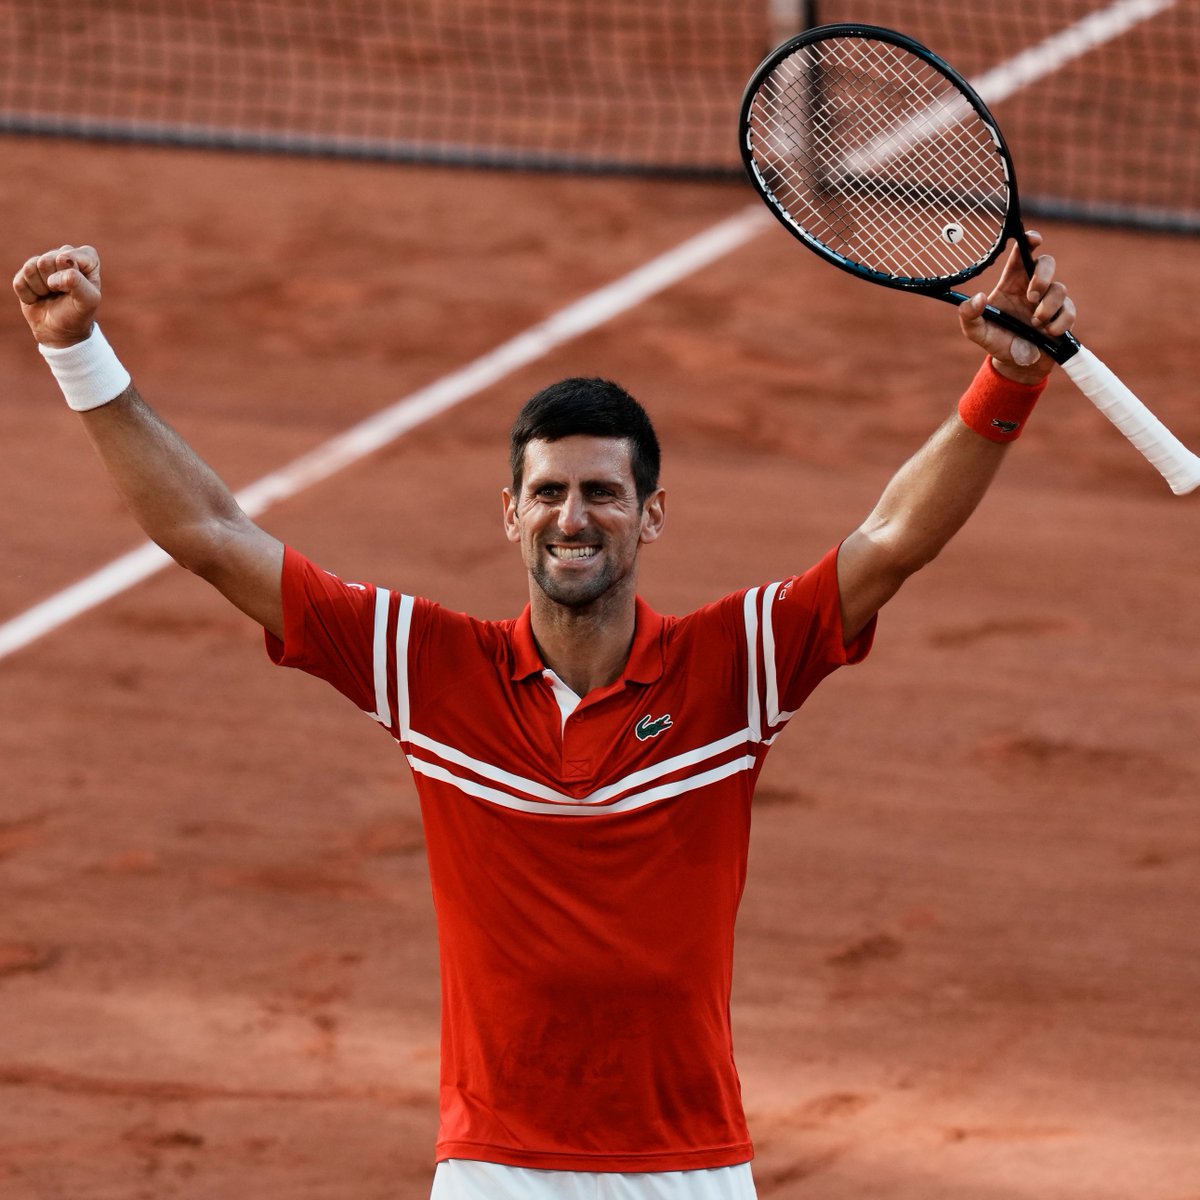 Age is just a number 📈 Novak Djokovic has officially broken Roger Federer's record as the oldest No. 1 in PIF ATP Rankings history at 36 years and 321 days old 🏆 @atptour | @DjokerNole